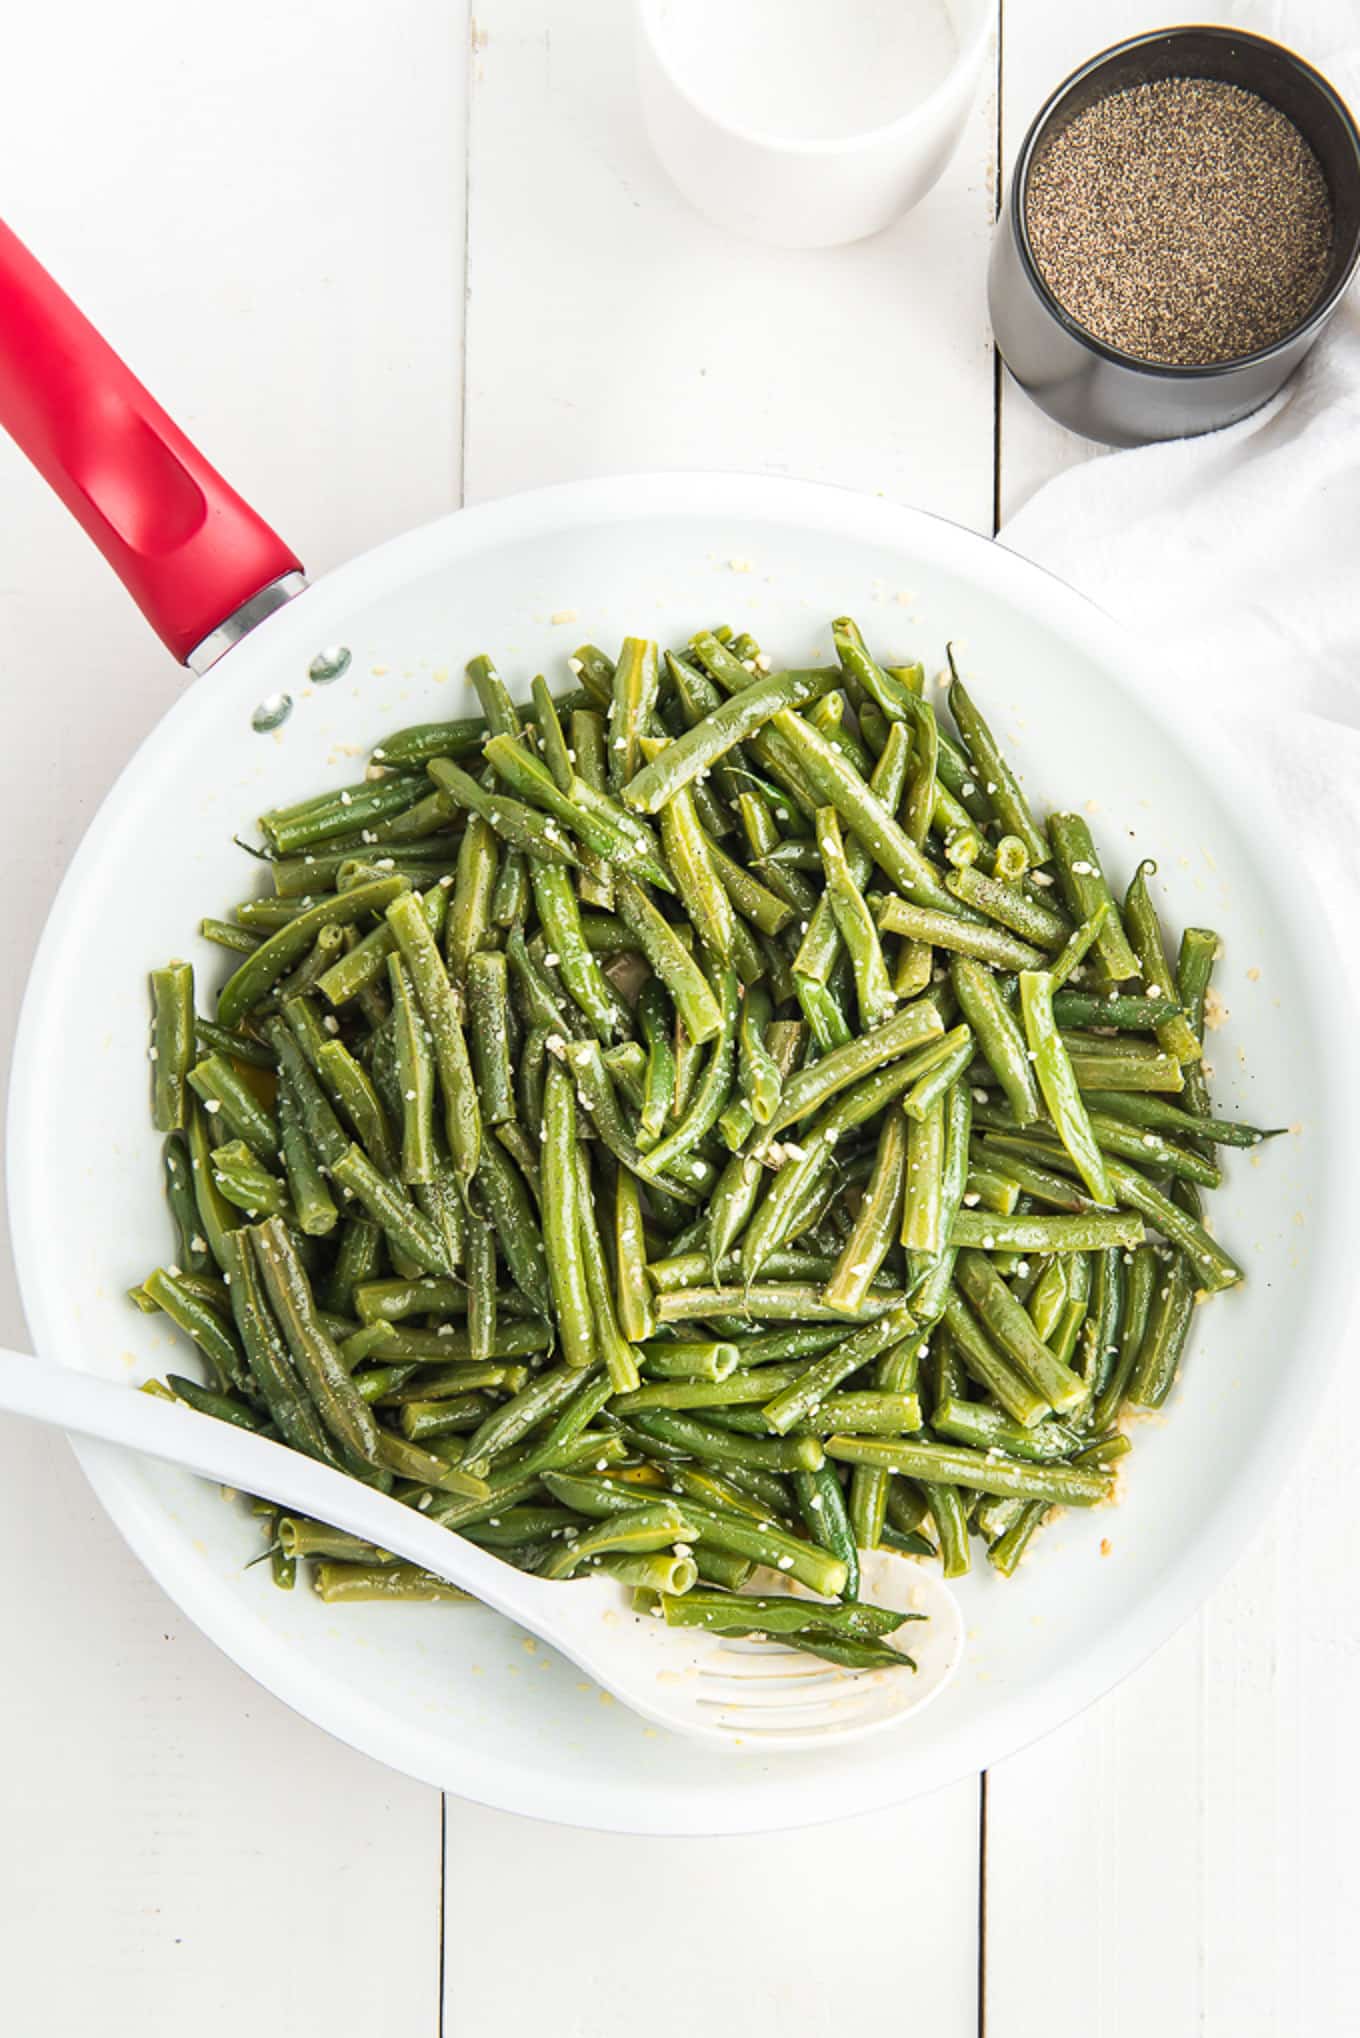 Blanched green beans in a skillet with a container of salt and pepper along with a white towel on the counter.